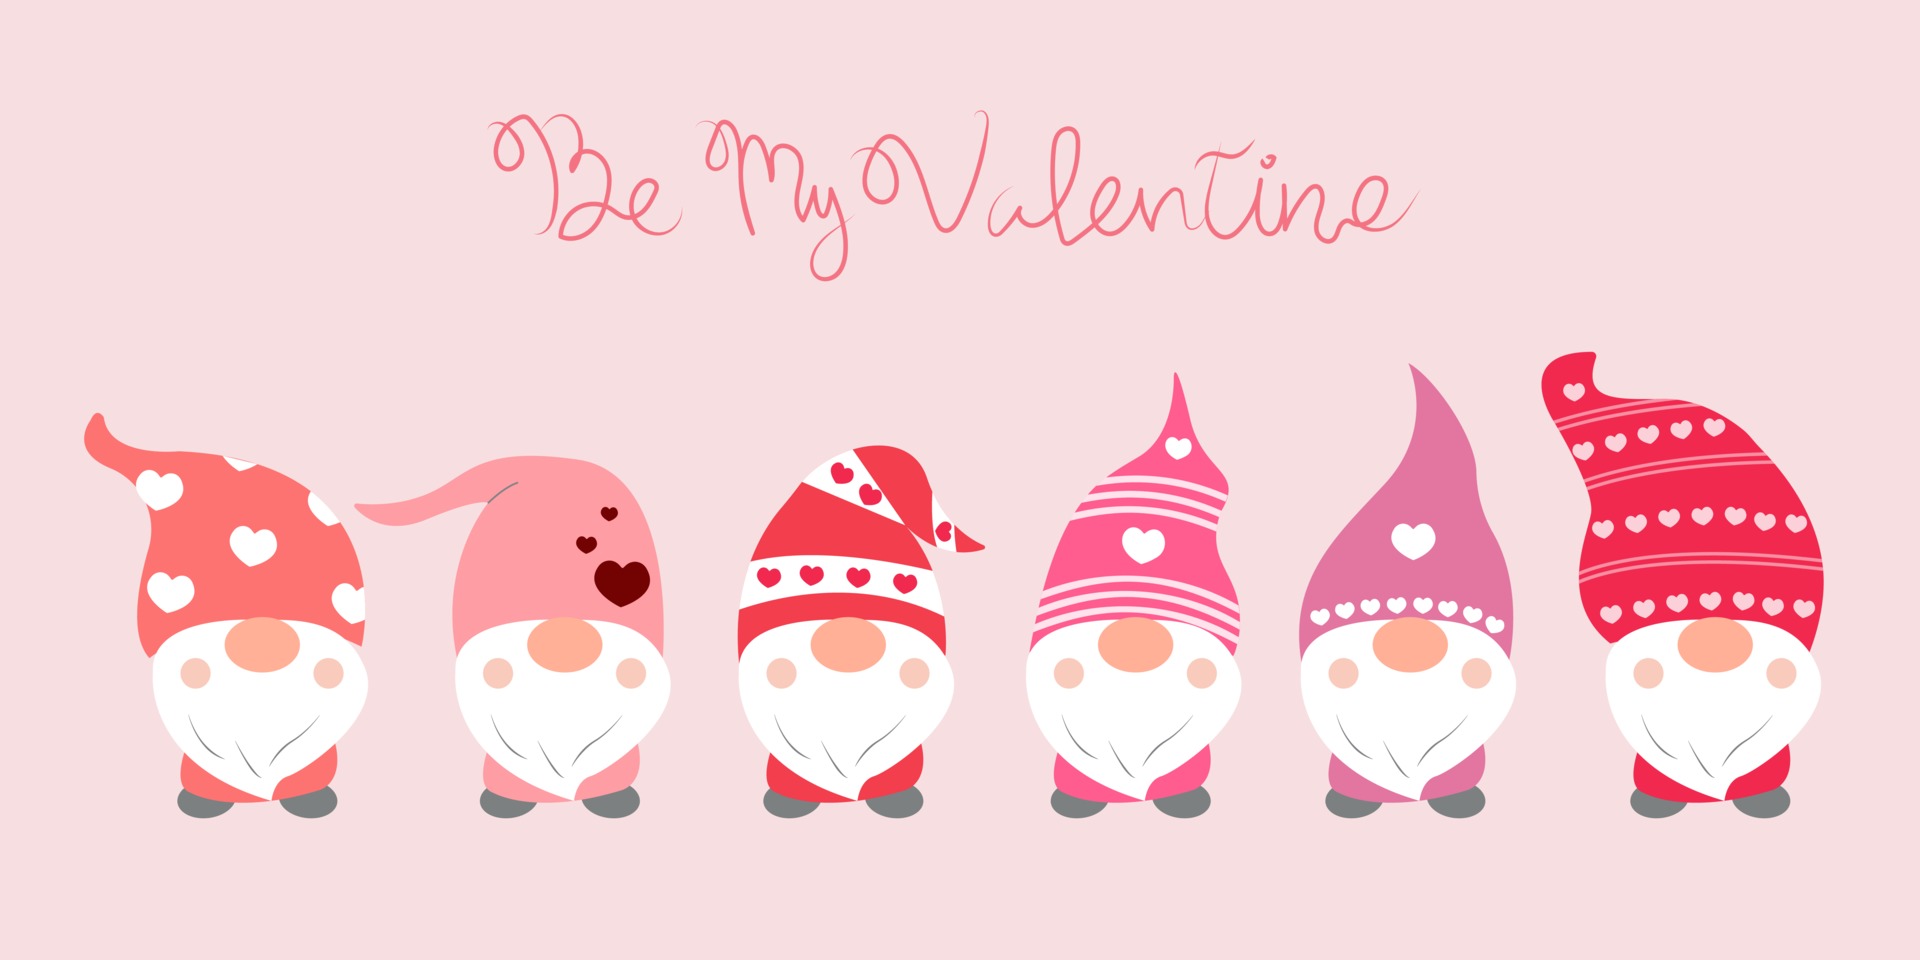 Valentine's Day Background With Cute Gnomes And 'Be My Valentine' Hand Drawn Word